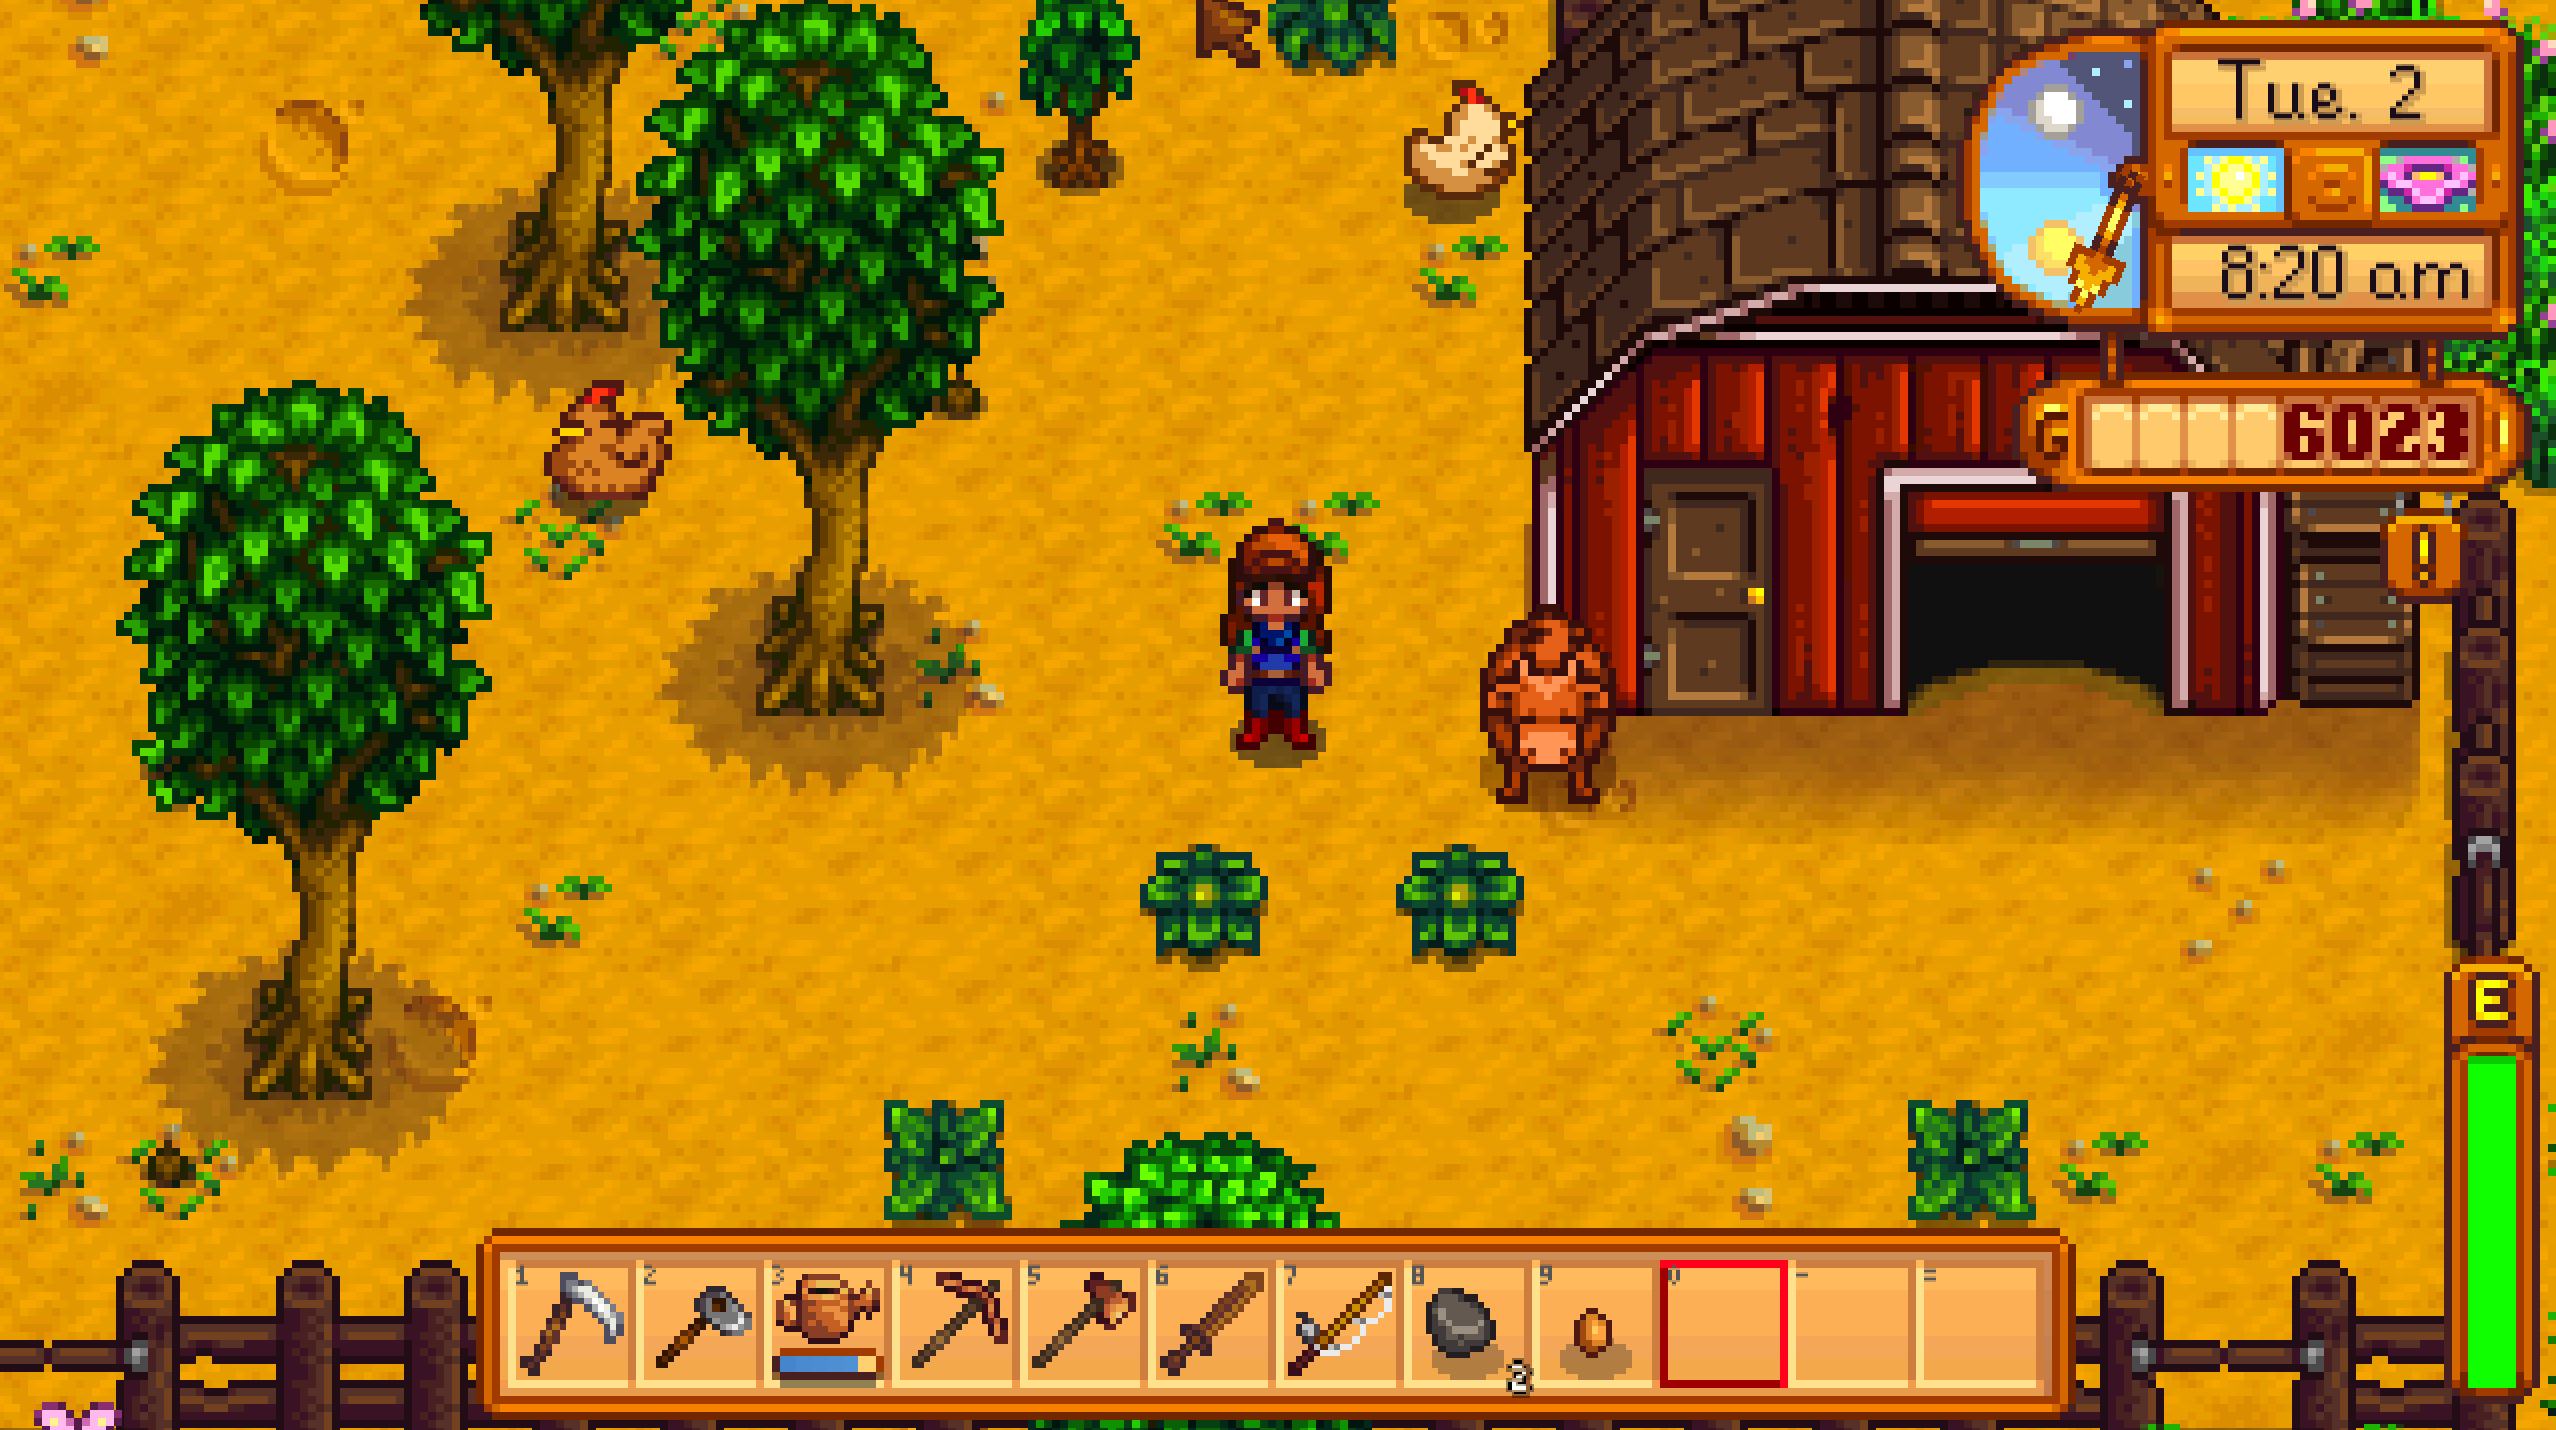 Dumpster diving and pickling pumpkins: ecocritical possibilities in Stardew Valley